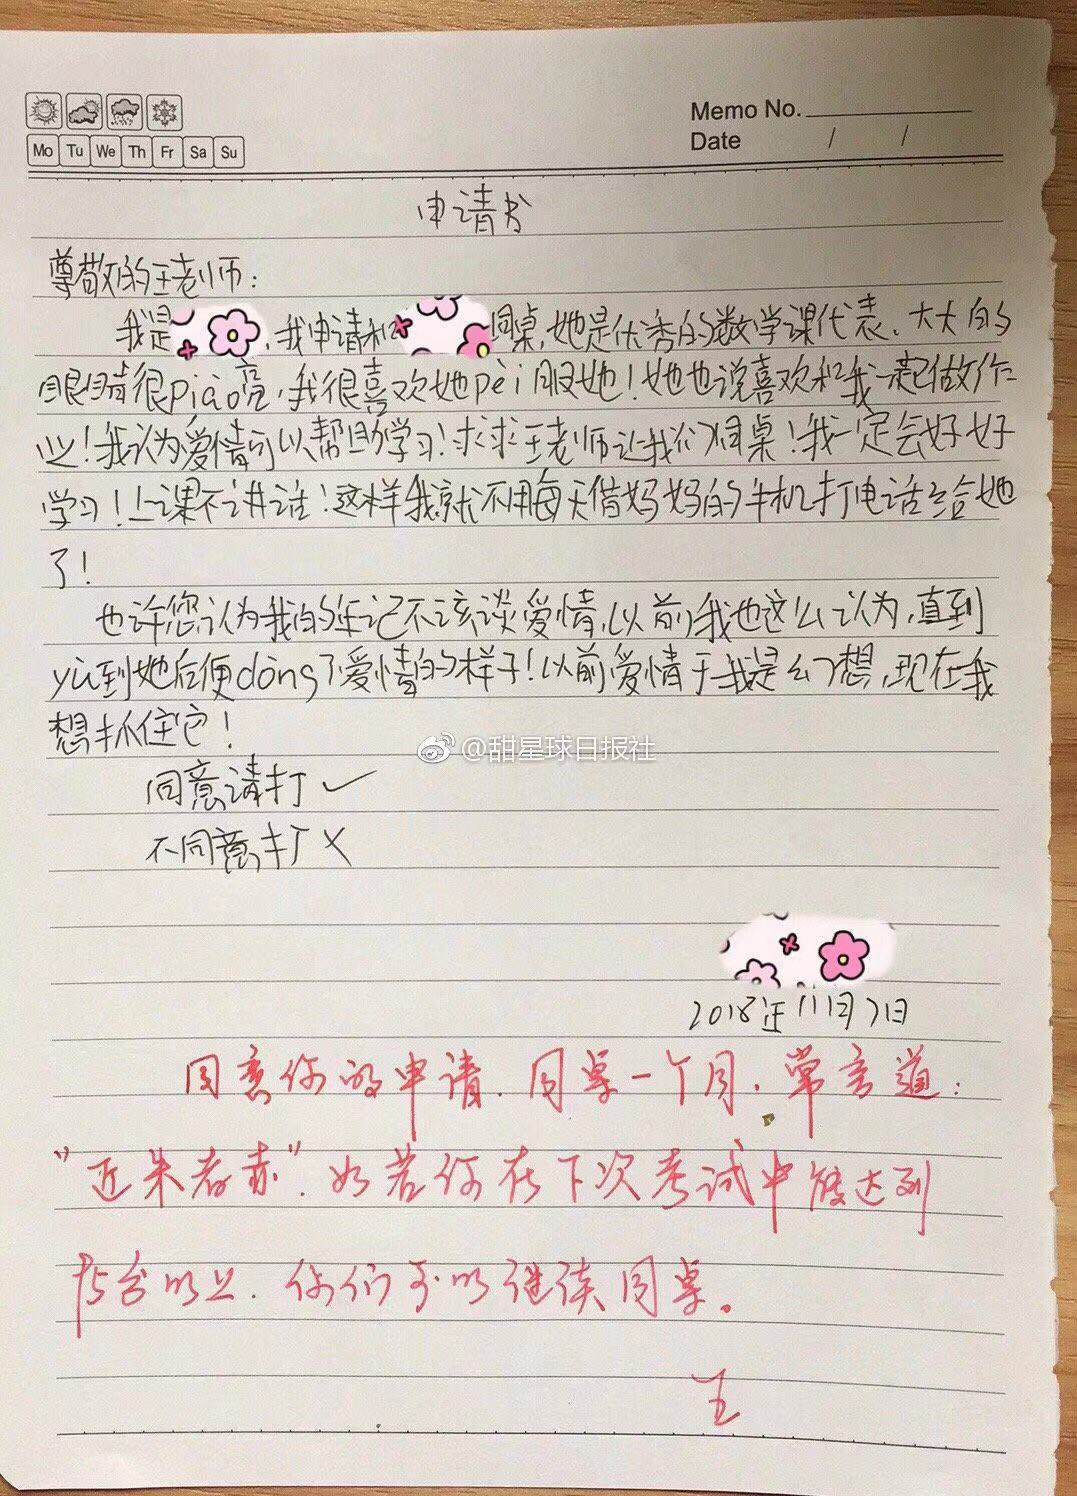 Chinese Love Letter With English Translation